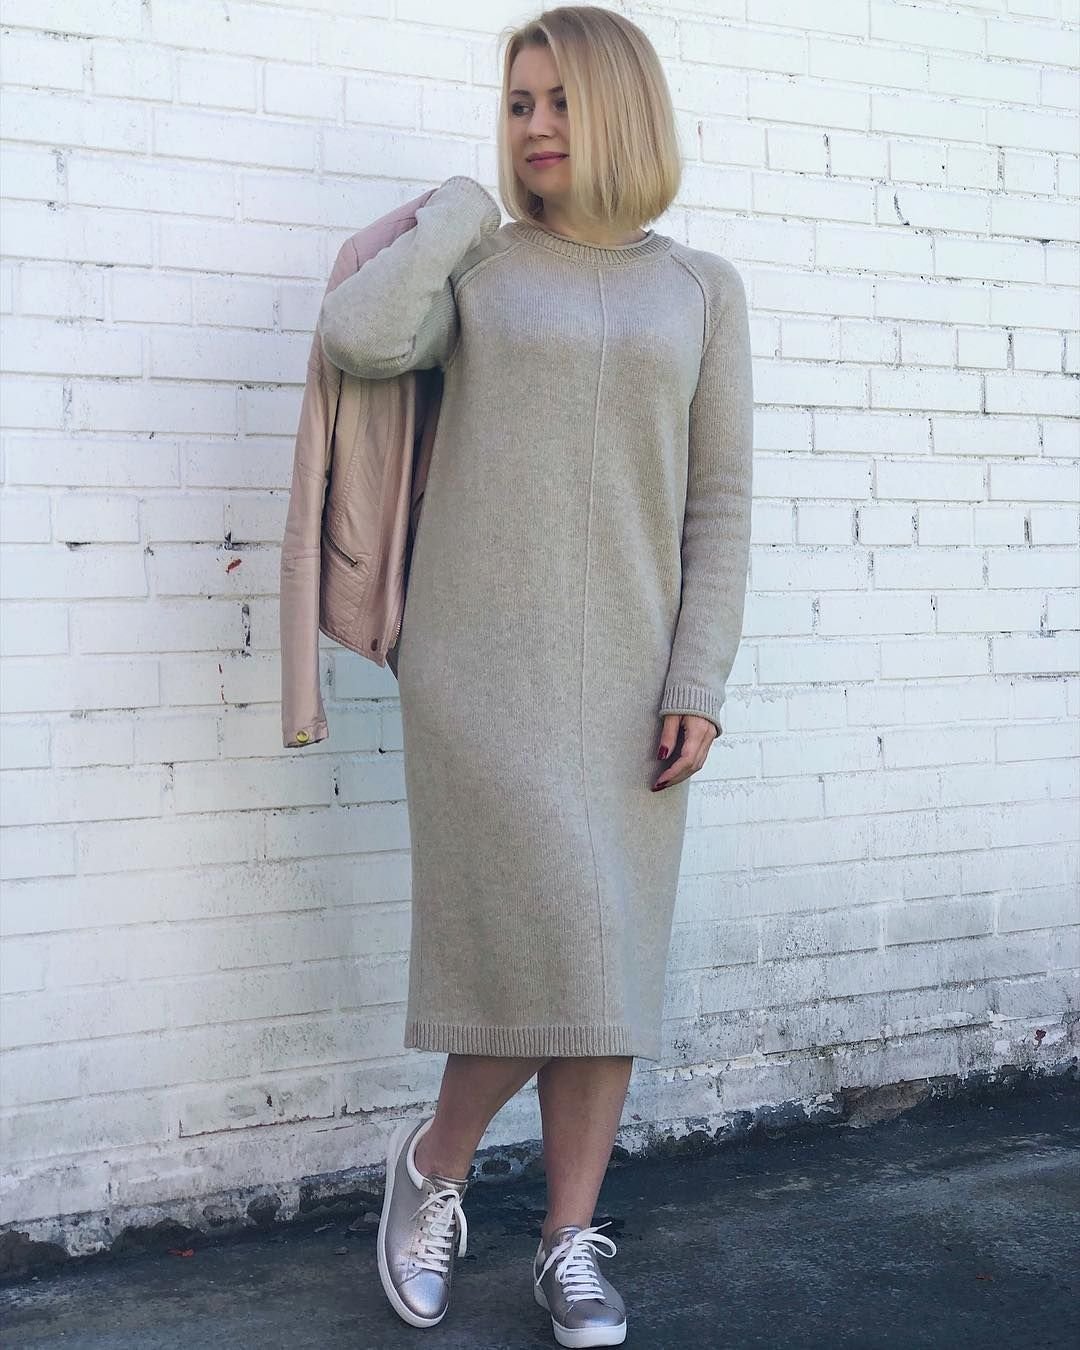 Mango knitted sweater dress in gray